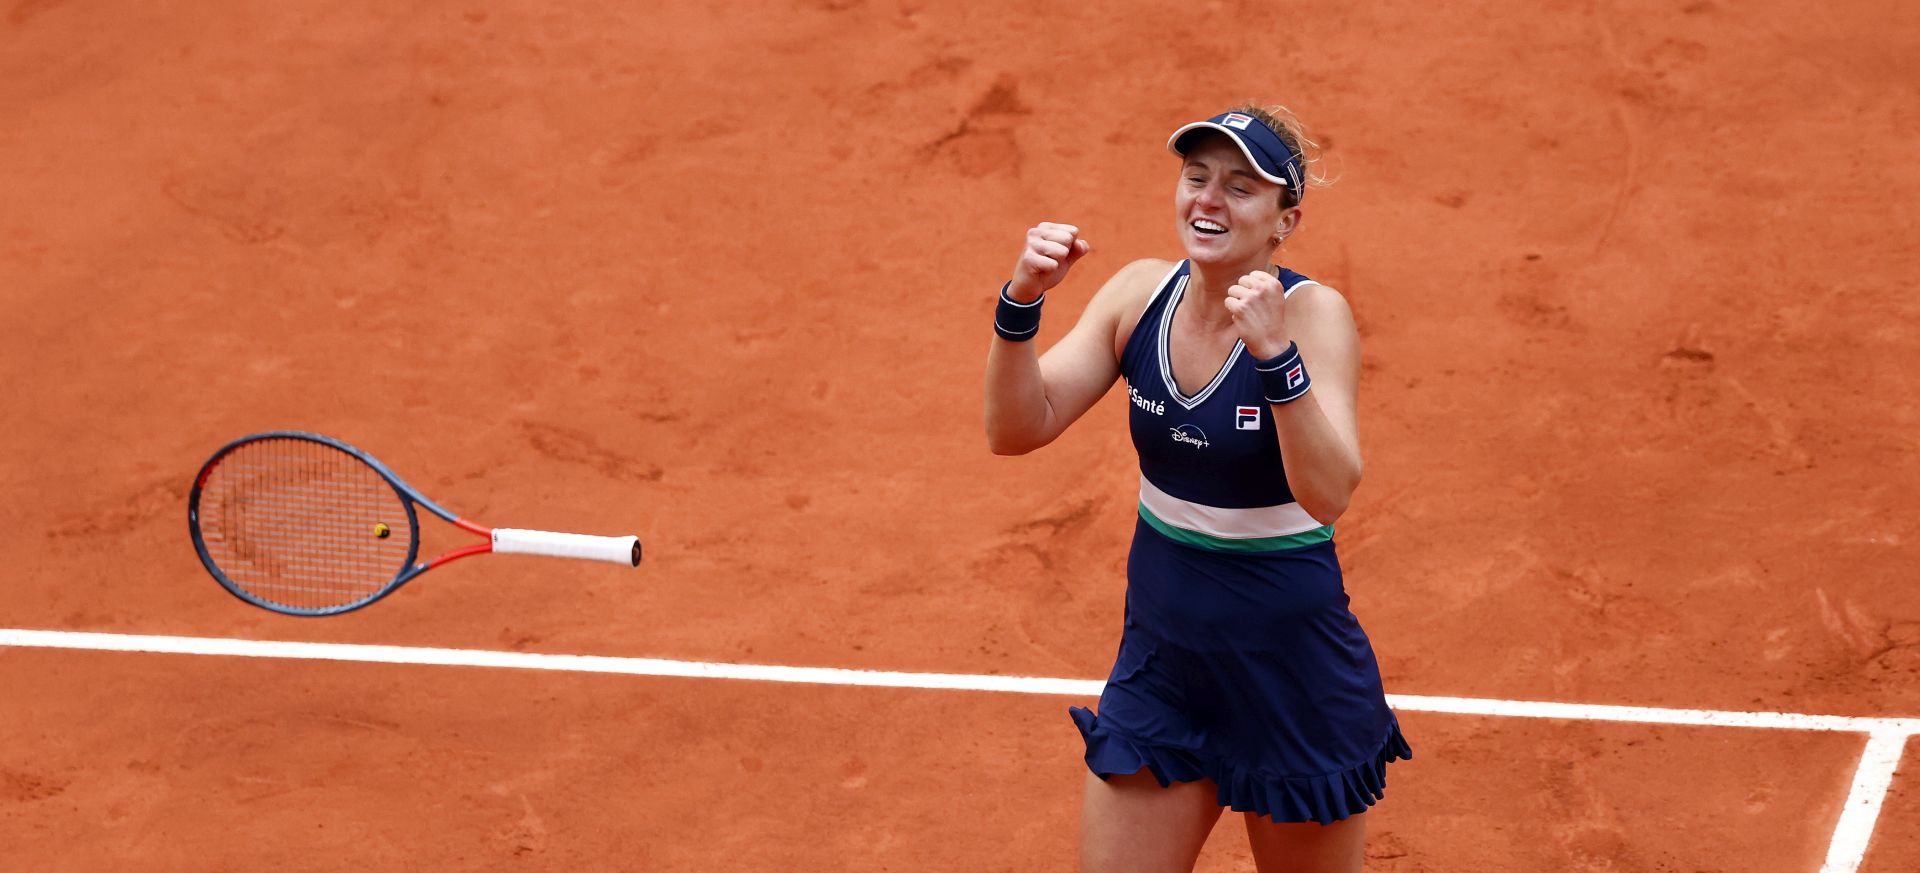 epa08724105 Nadia Podoroska of Argentina reacts after winning against Elina Svitolina of Ukraine in their women’s quarter final match during the French Open tennis tournament at Roland ​Garros in Paris, France, 06 October 2020.  EPA/IAN LANGSDON